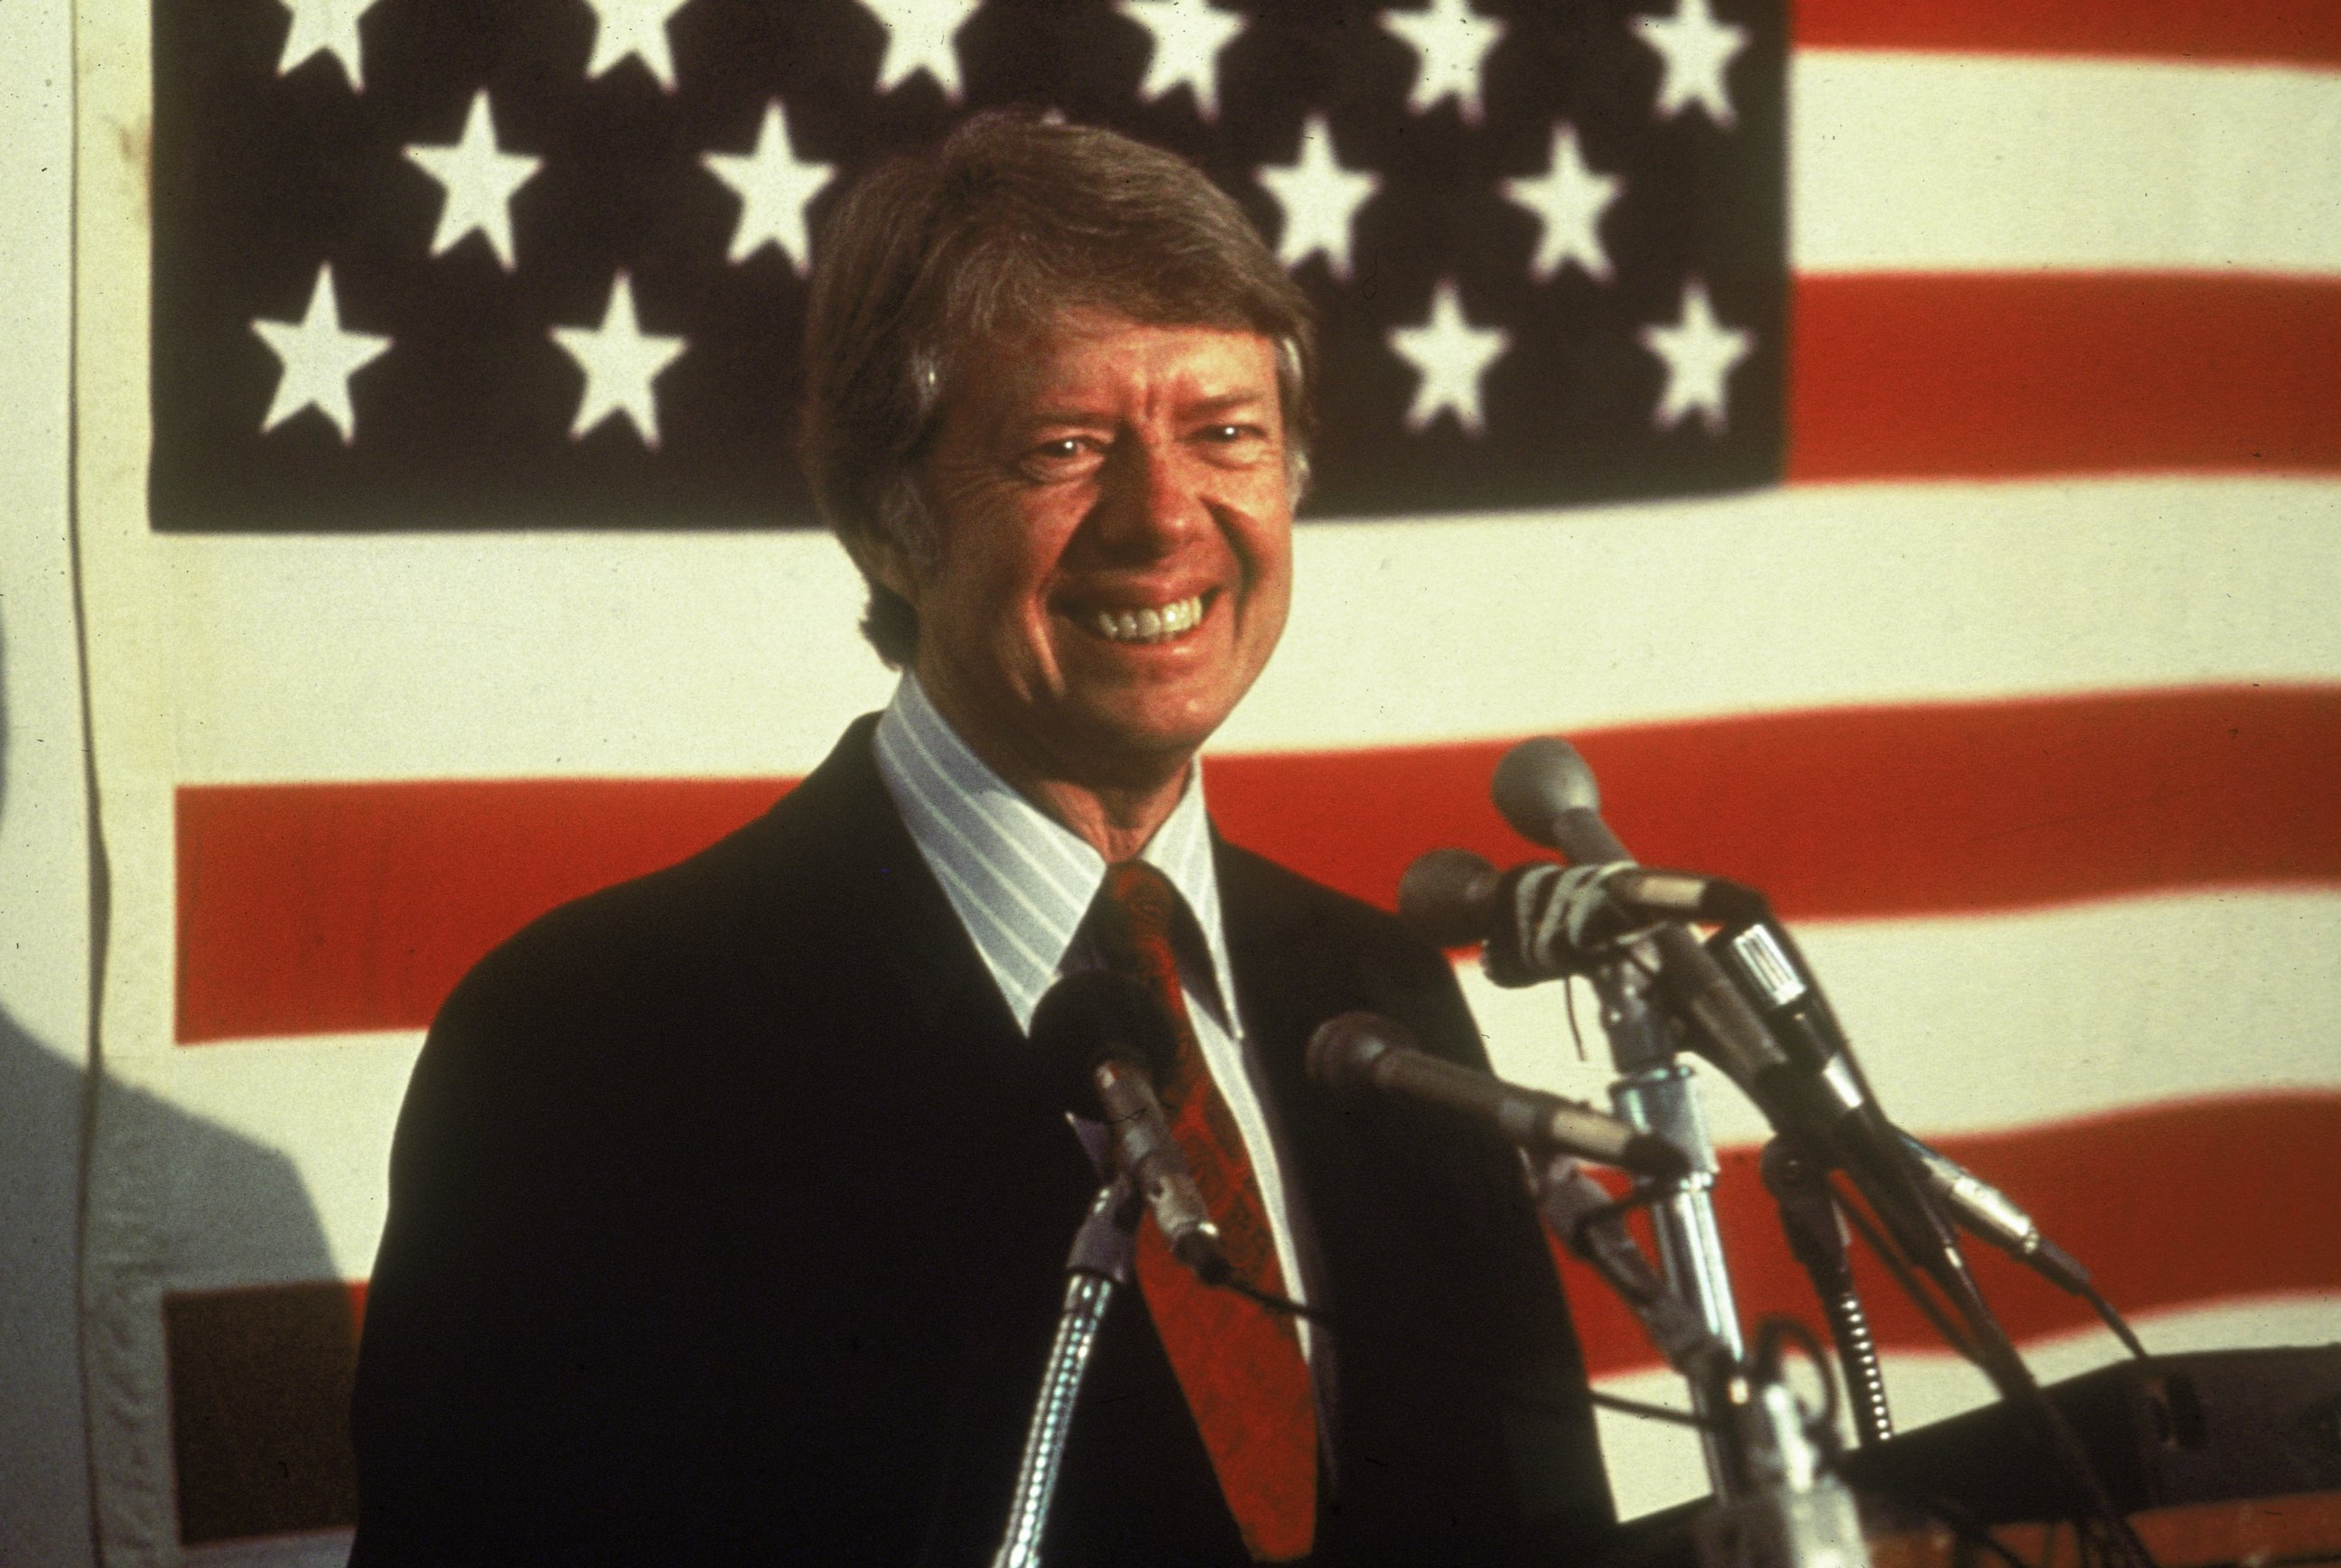 PHOTO: U.S. President Jimmy Carter smiling at a podium in front of an American flag. 